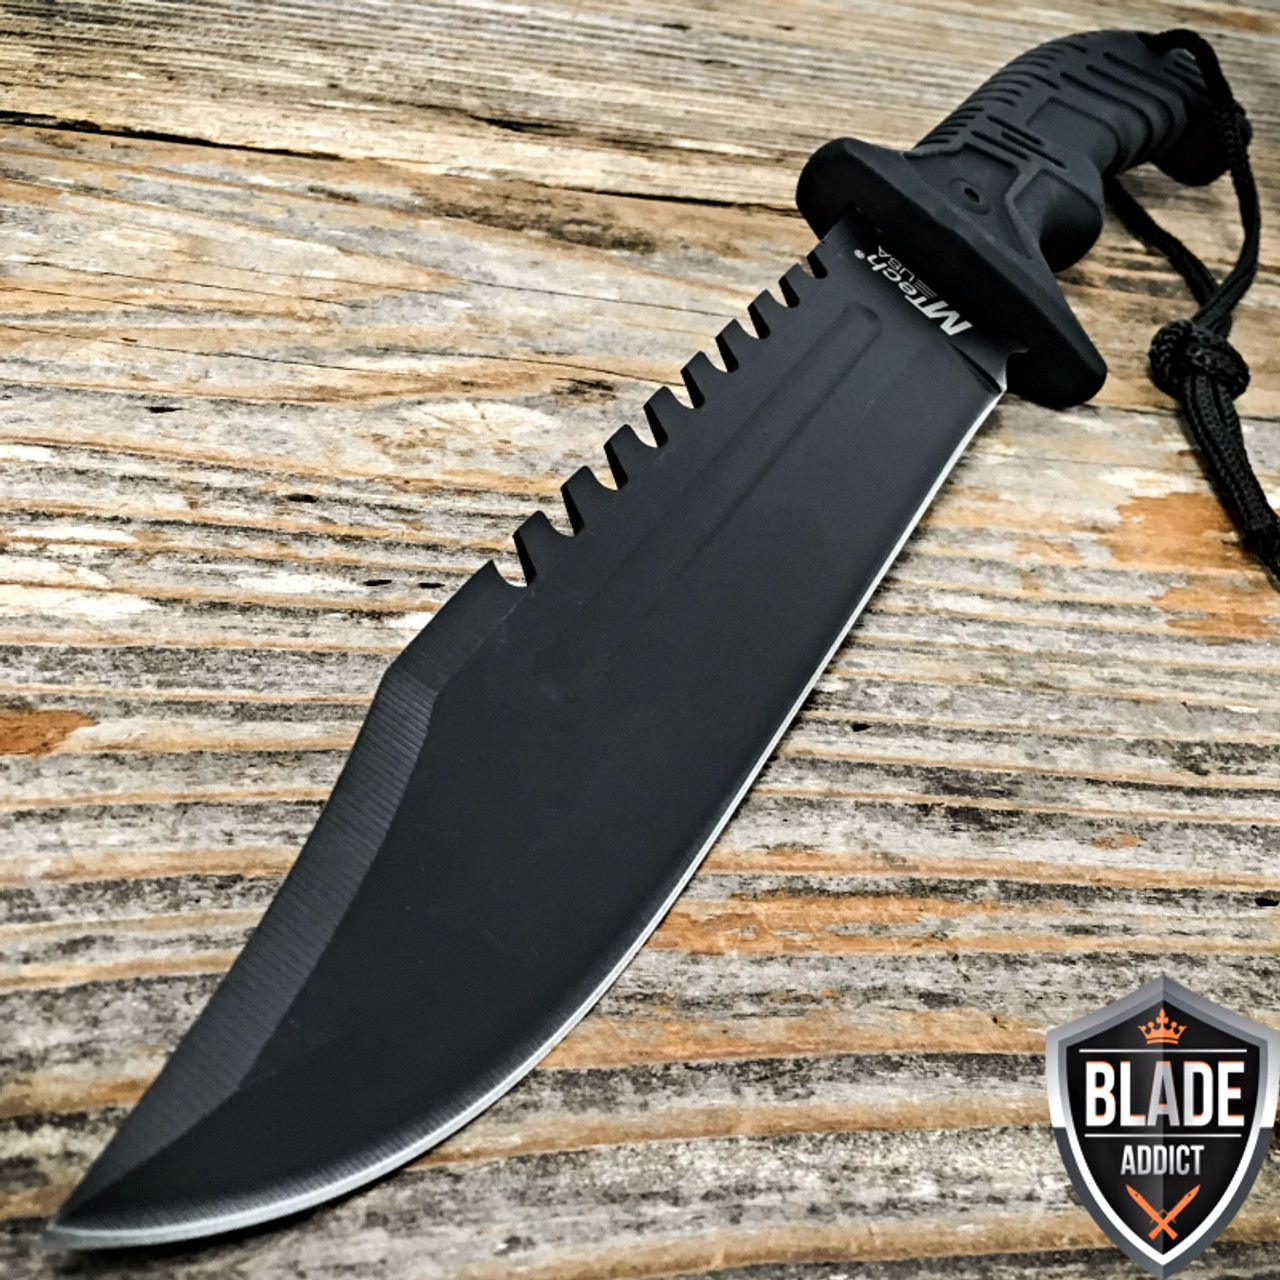 13 Mtech Black Tactical Survival Rambo Hunting Fixed Blade Knife Army